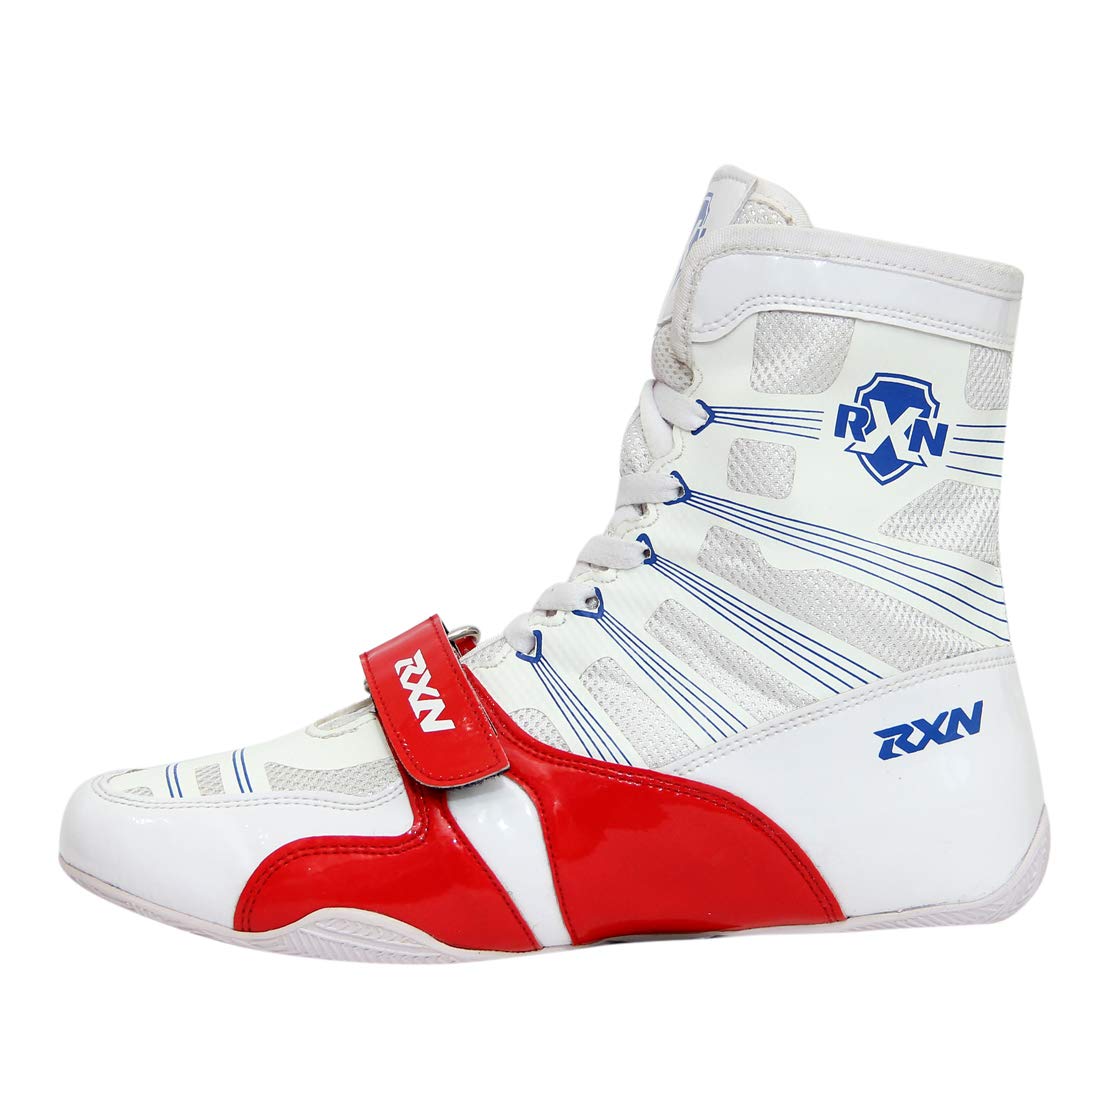 RXN Knockout White/Red Boxing Shoes